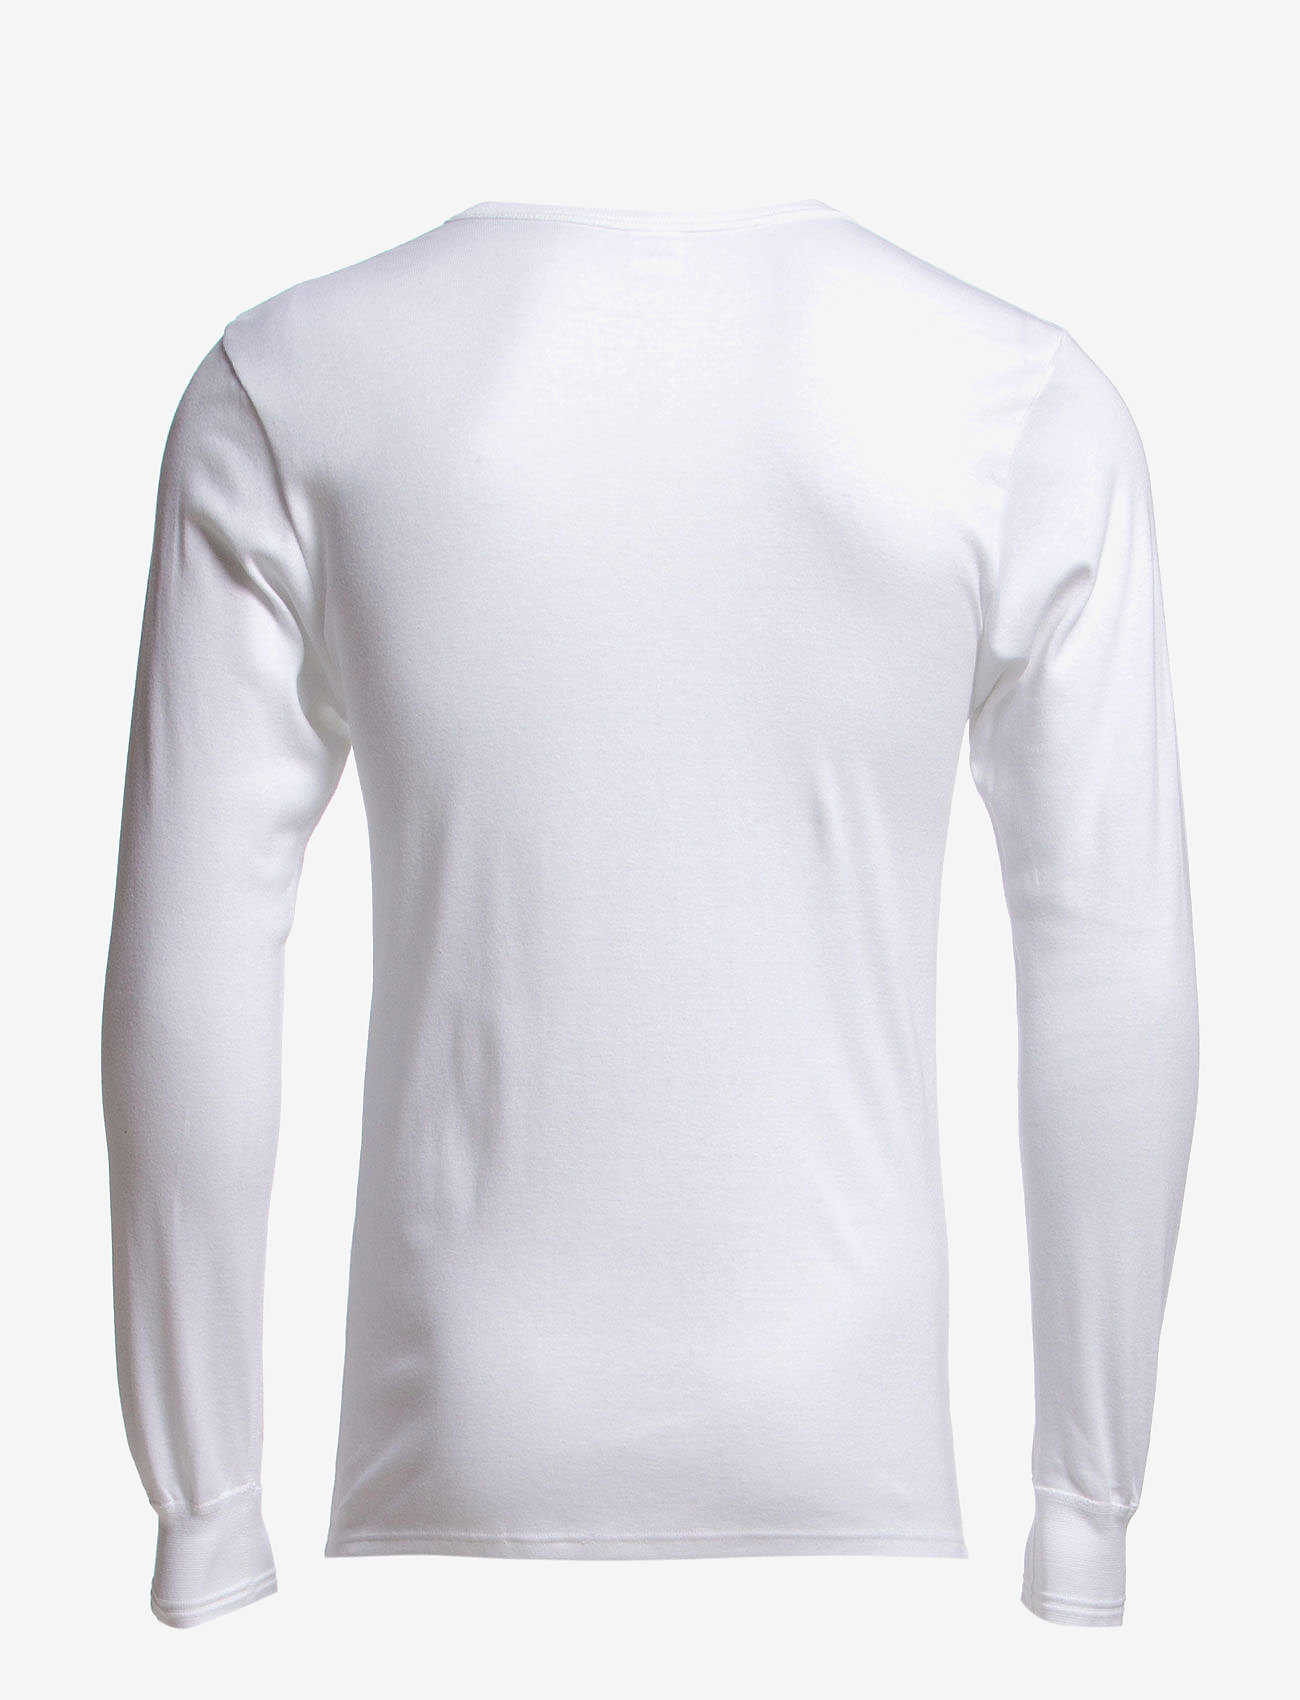 Dovre - Dovre T-shirt Long sleeves - base layers - white - 1